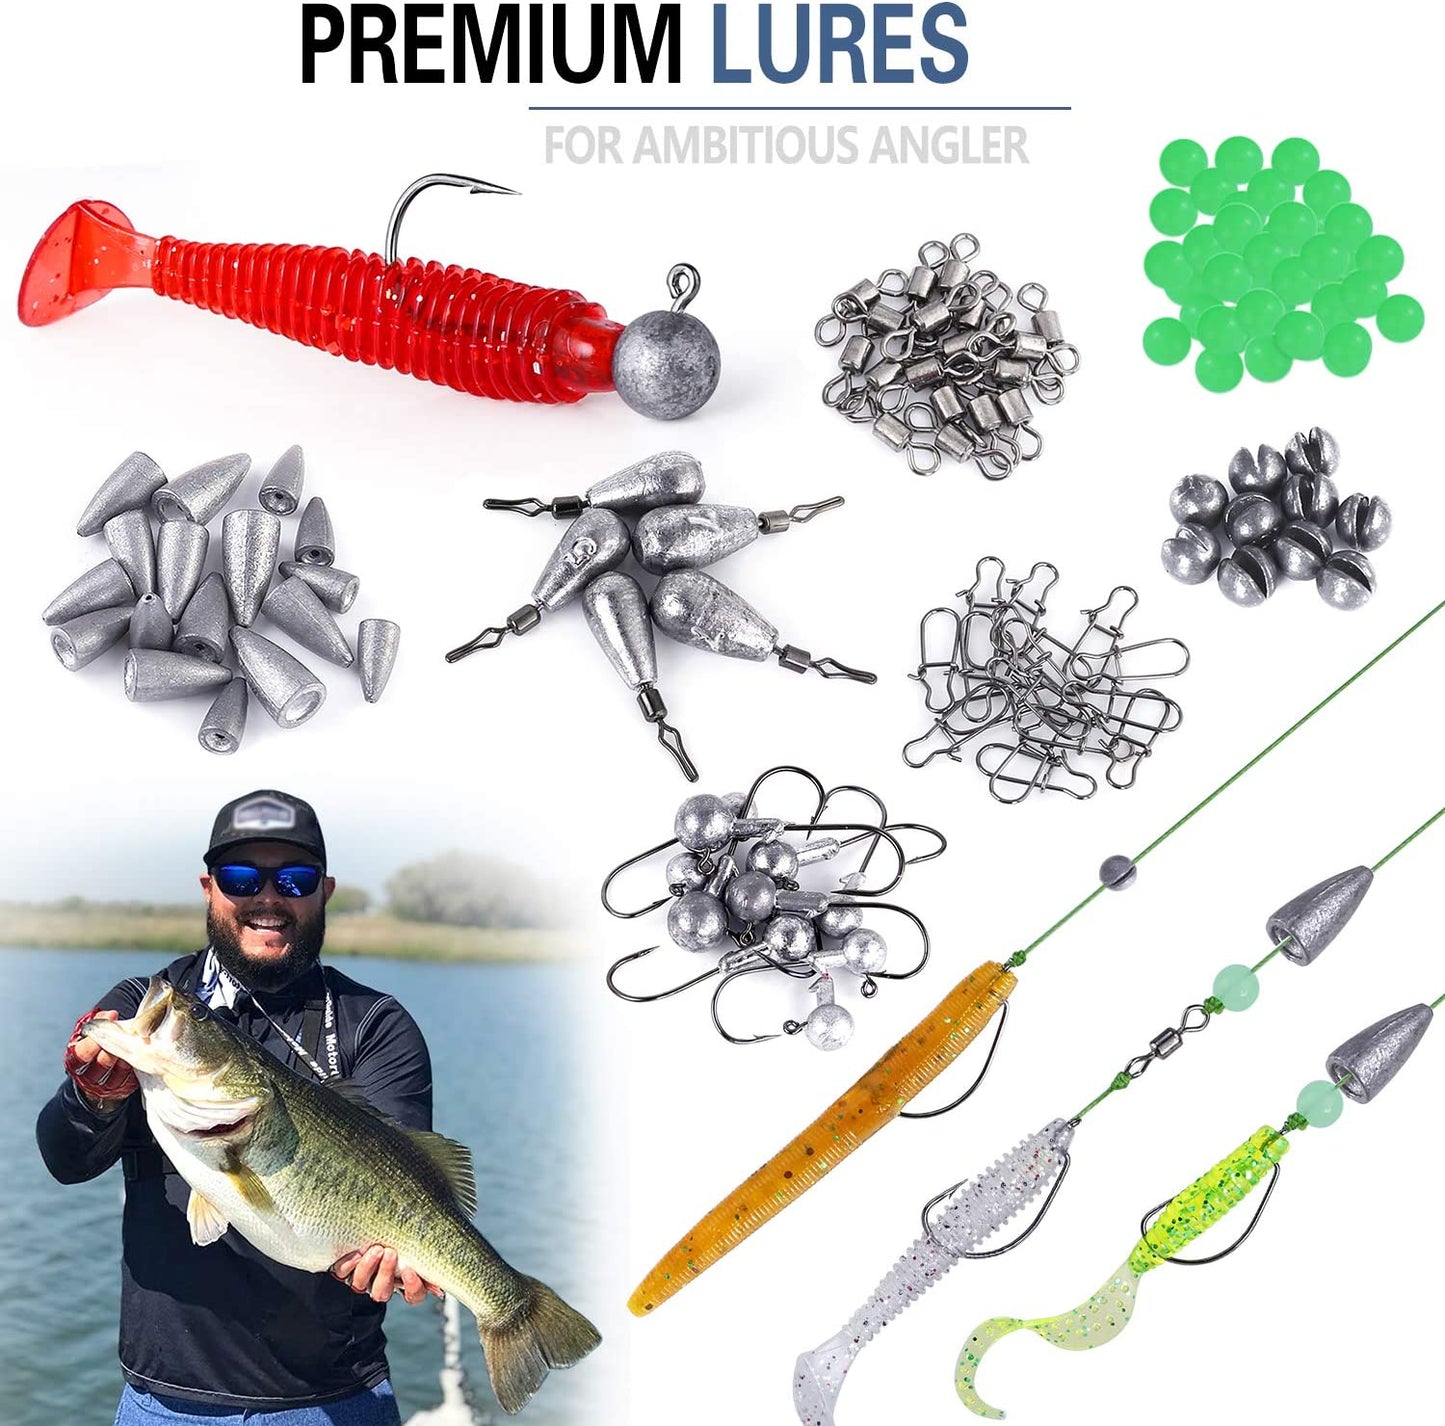 A number of fishing sinkers and lures that are included with the 320 piece fishing lure set. There is an inset image of a man holding a large fish.